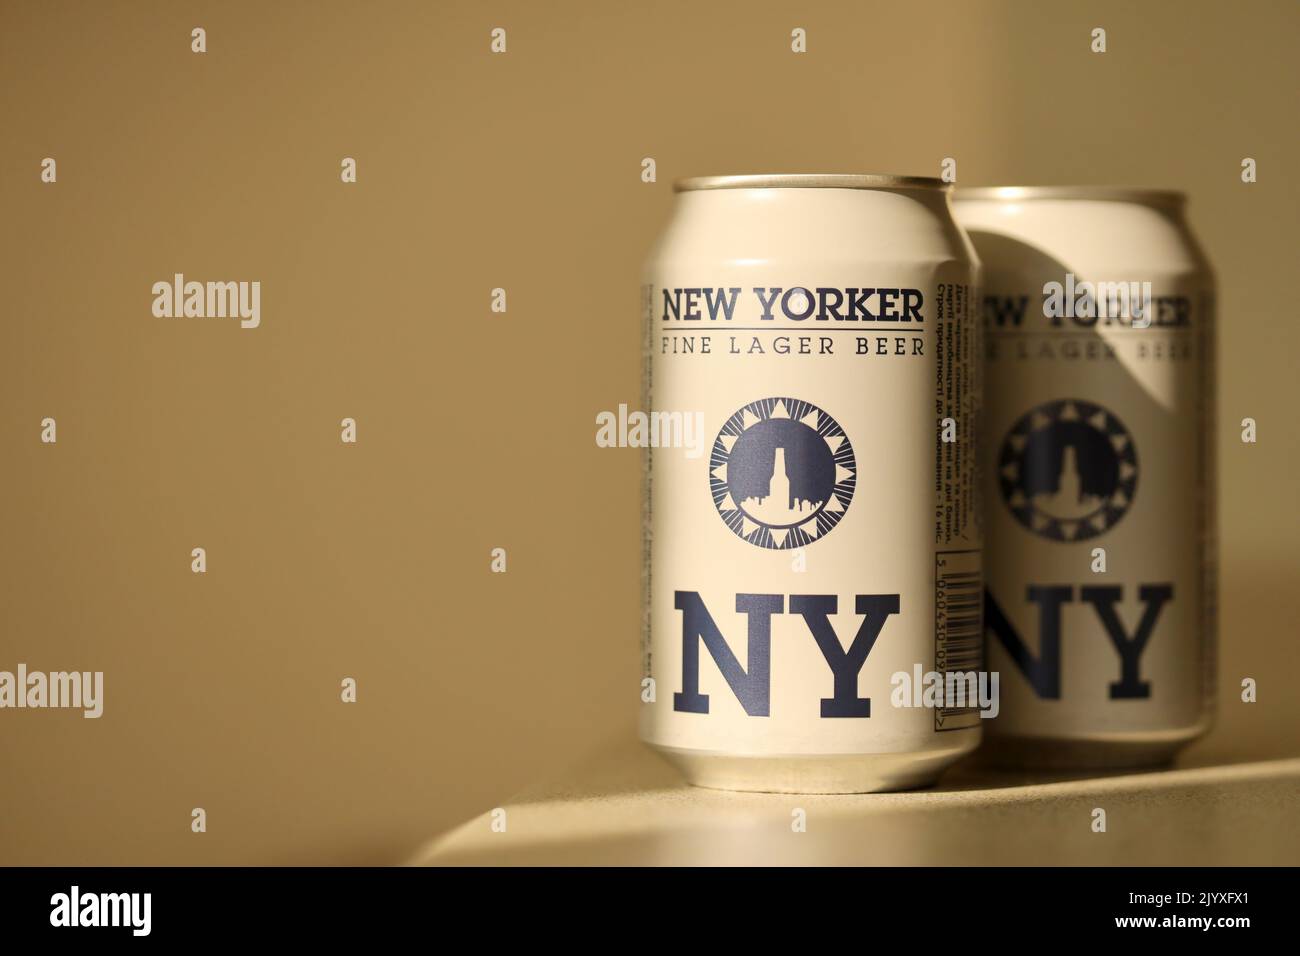 TERNOPIL, UKRAINE - JULY 18, 2022 Two cans of New Yorker fine lager beer with original logo and design on brown retro background surface Stock Photo